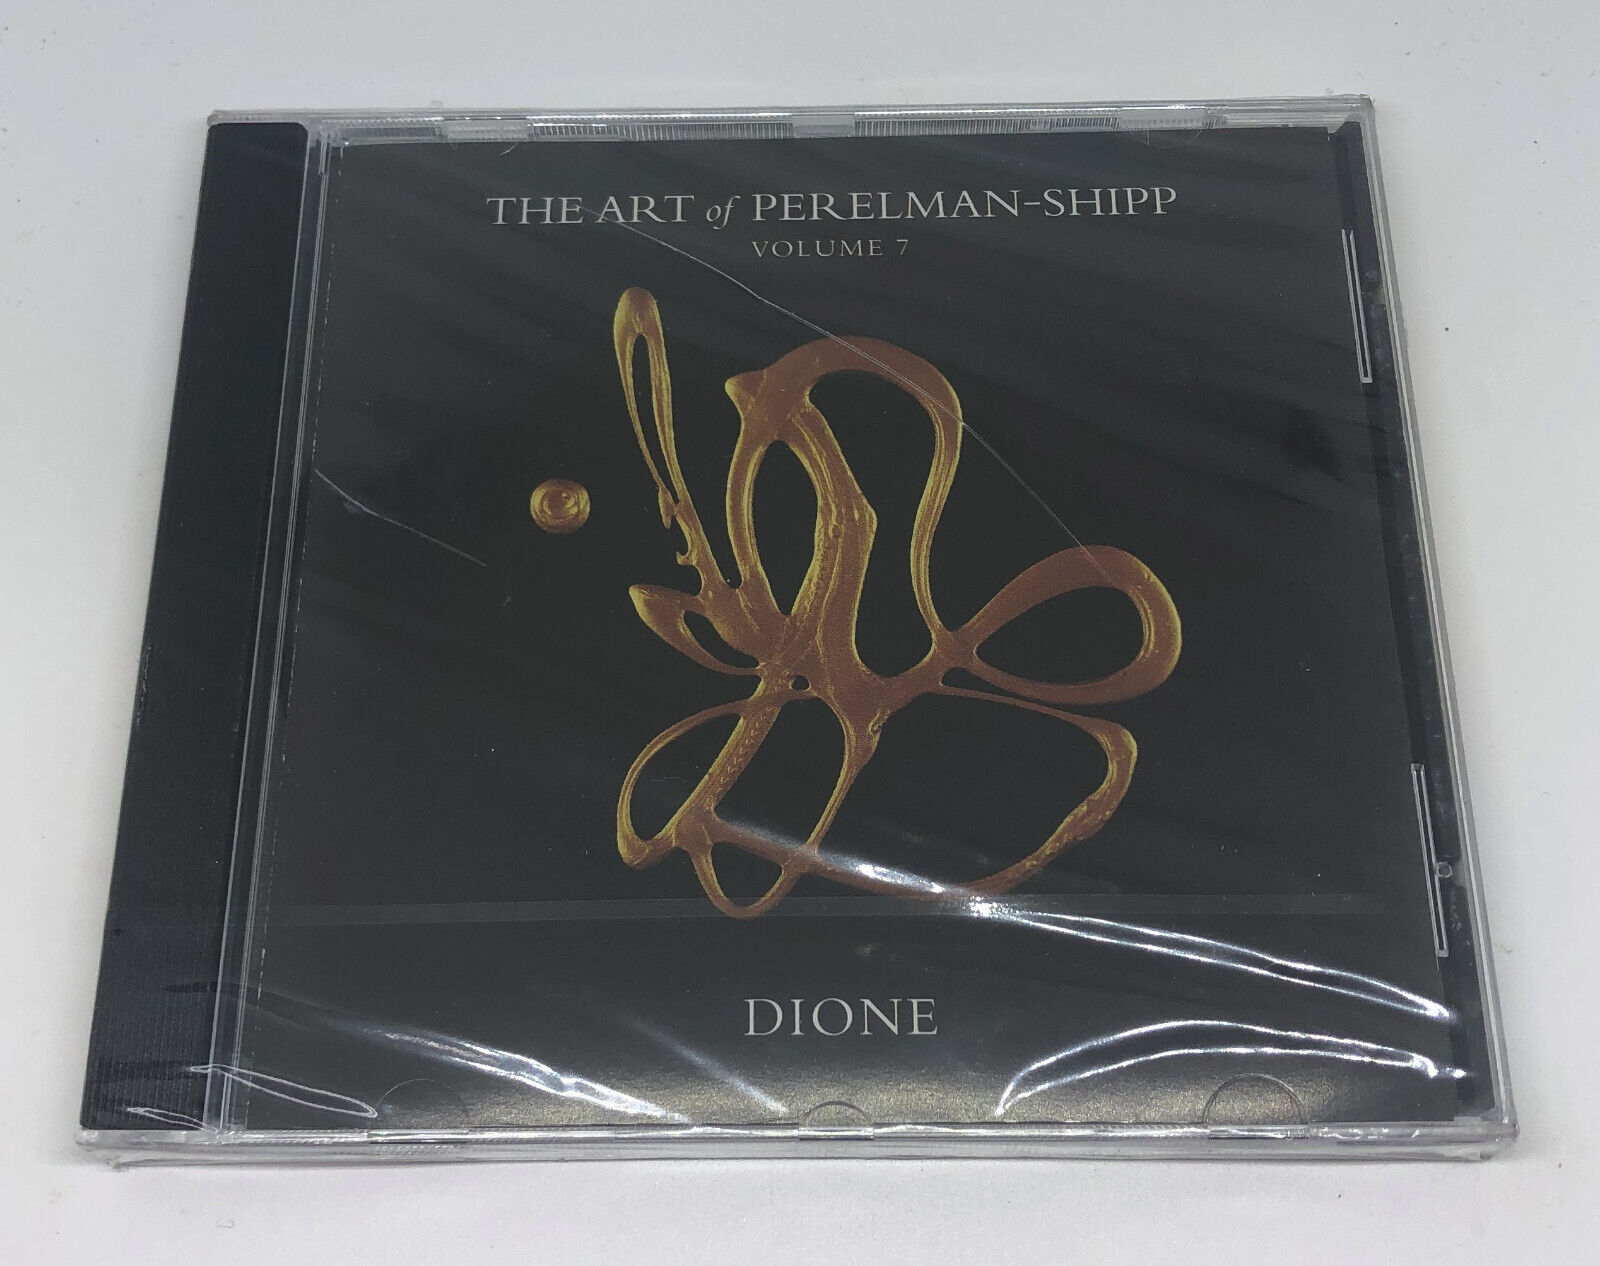 Primary image for Ivo Perelman - Dione (2017, CD) The Art of Perelman-Shipp Sealed, Cracked Case